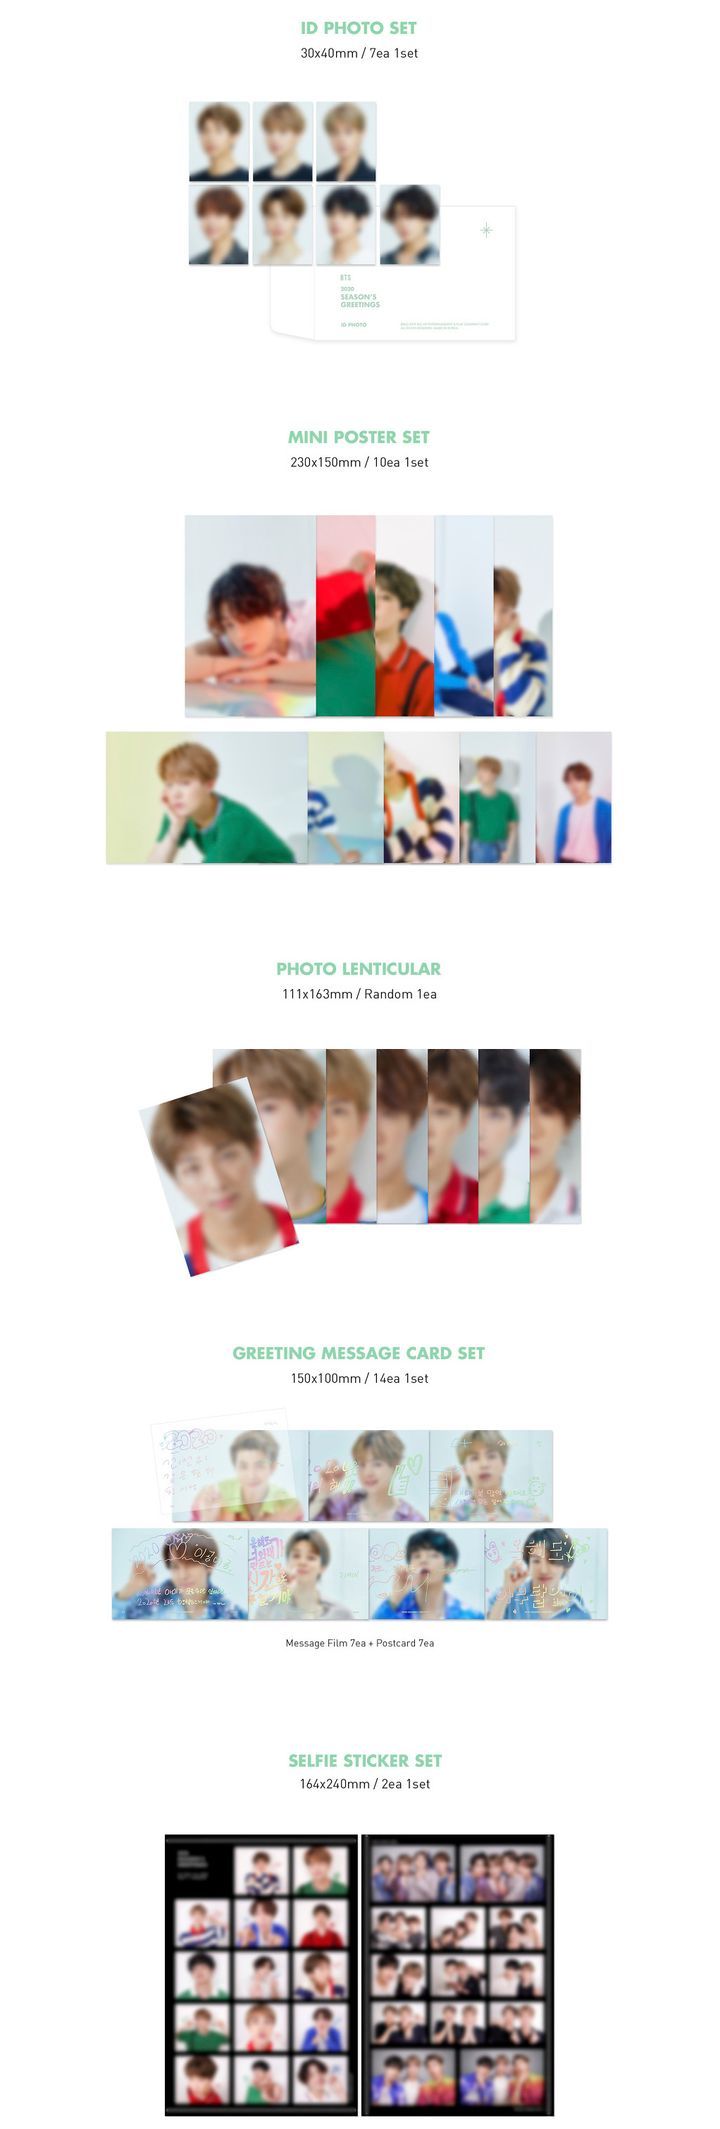 YESASIA: BTS : V Style - Douar Bracelet Accessories,PHOTO/POSTER,MALE  STARS,GIFTS,GROUPS,Celebrity Gifts - BTS, Asmama - Korean Collectibles -  Free Shipping - North America Site